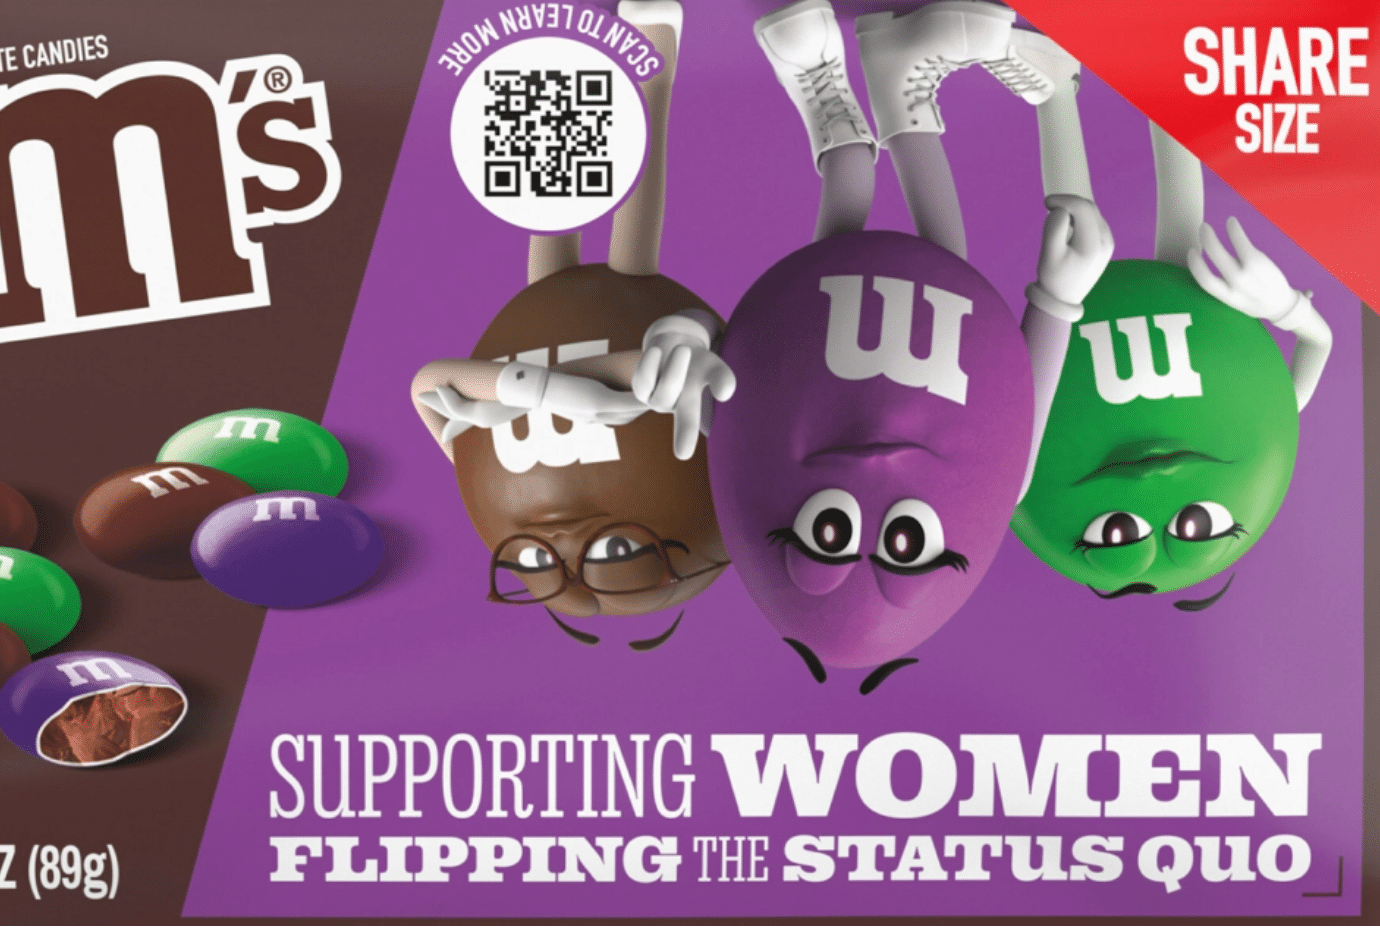 Fans will flip over new packs of M&M's candy that celebrate women